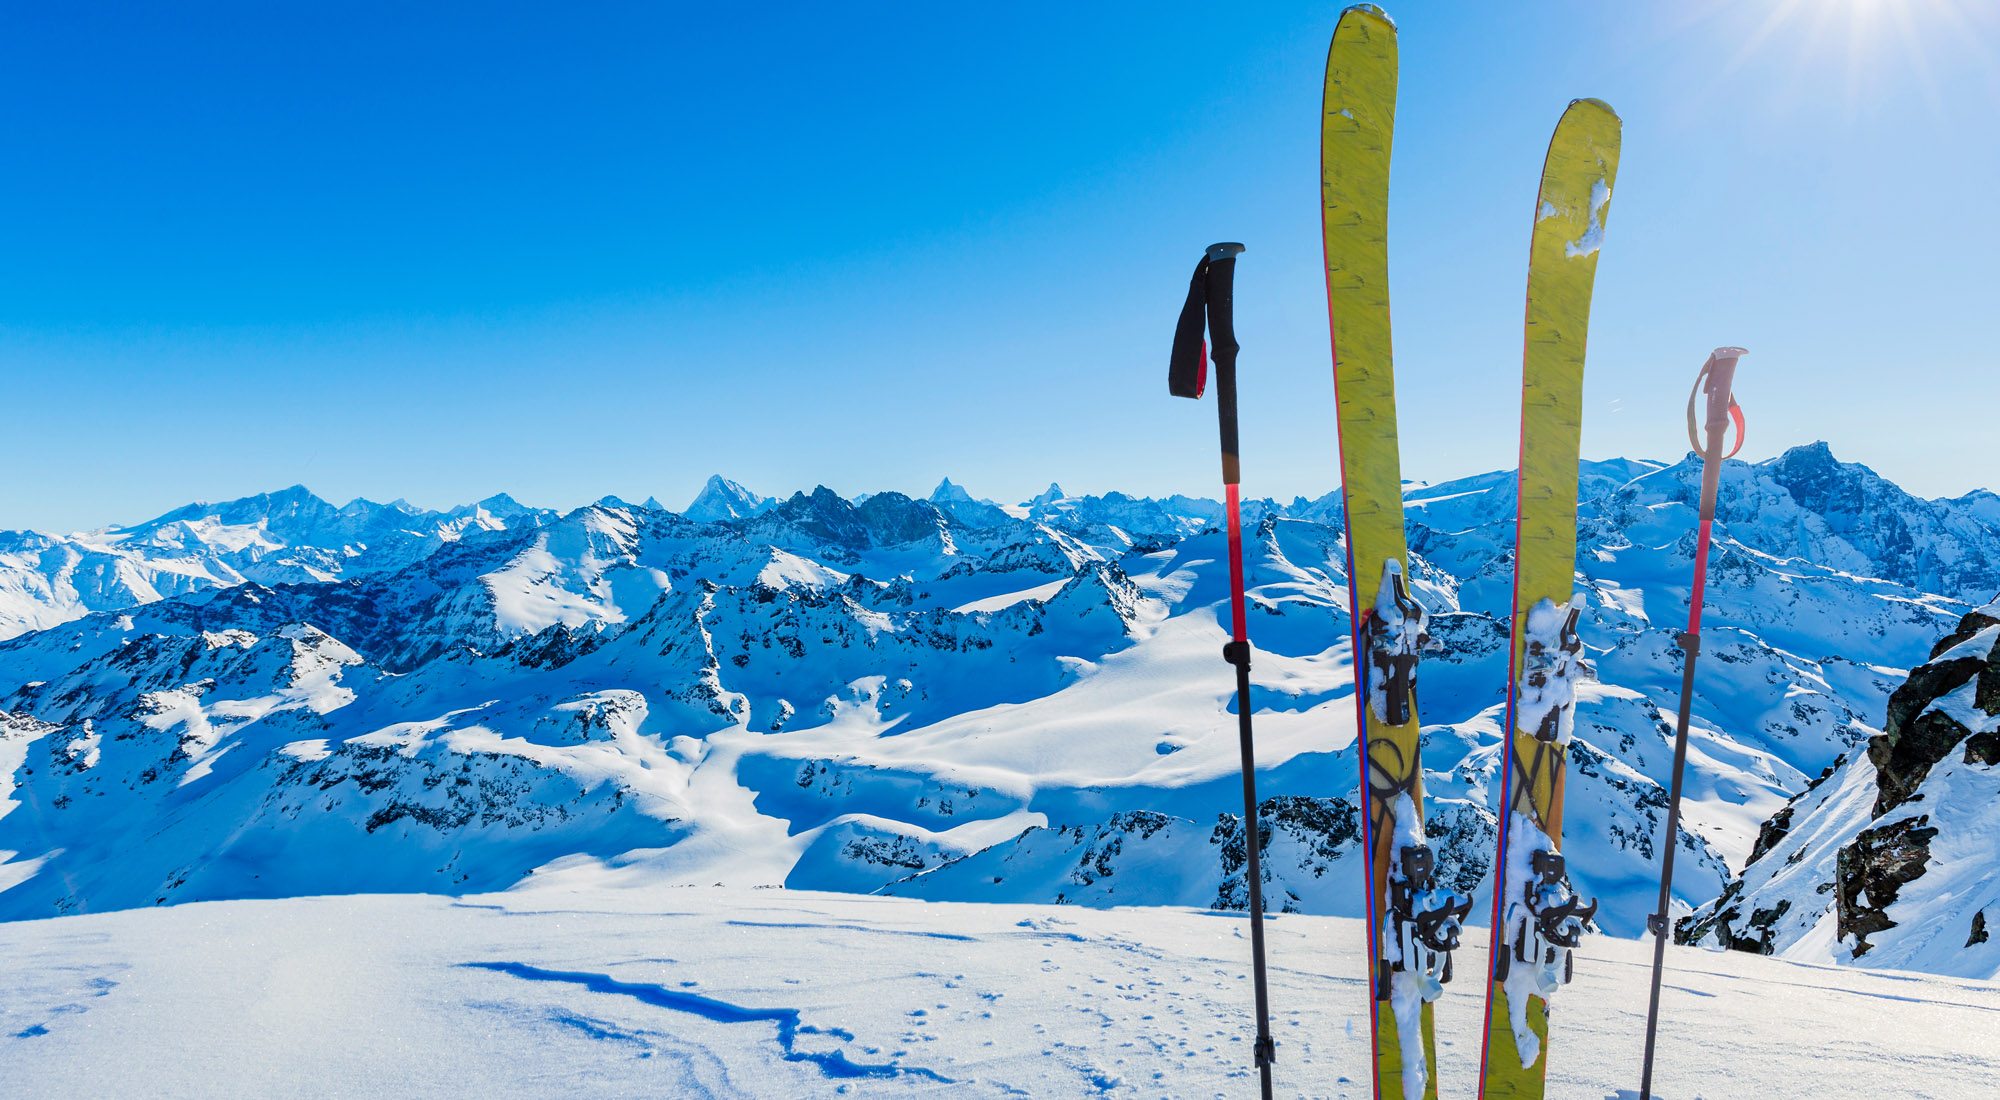 Skis and Sport Equipments